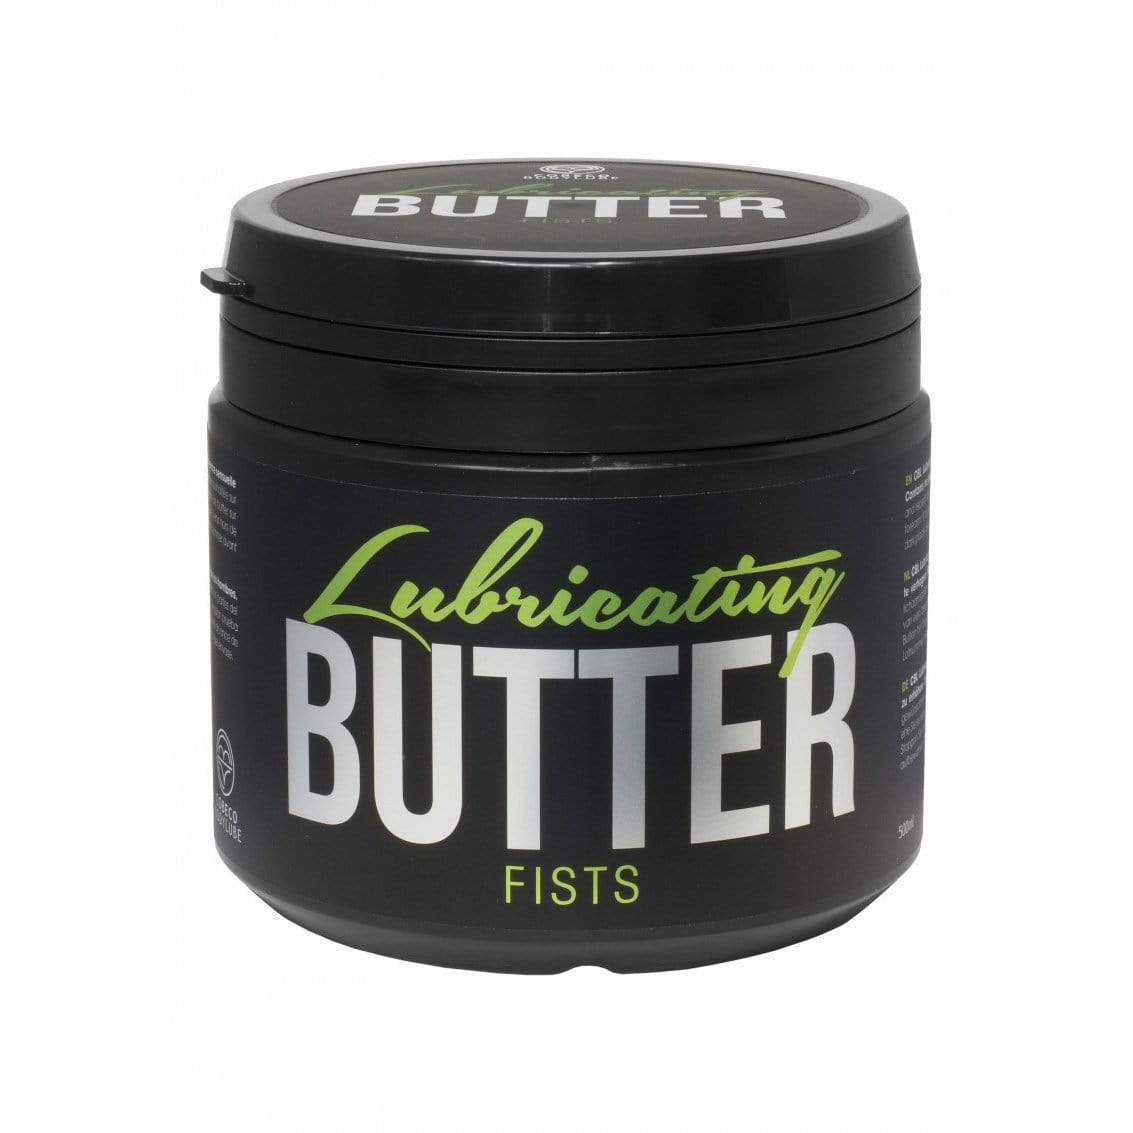 Cobeco Pharma - Lubricating Butter Fists Oil Based Lubricant 500ml -  Lube (Oil Based)  Durio.sg